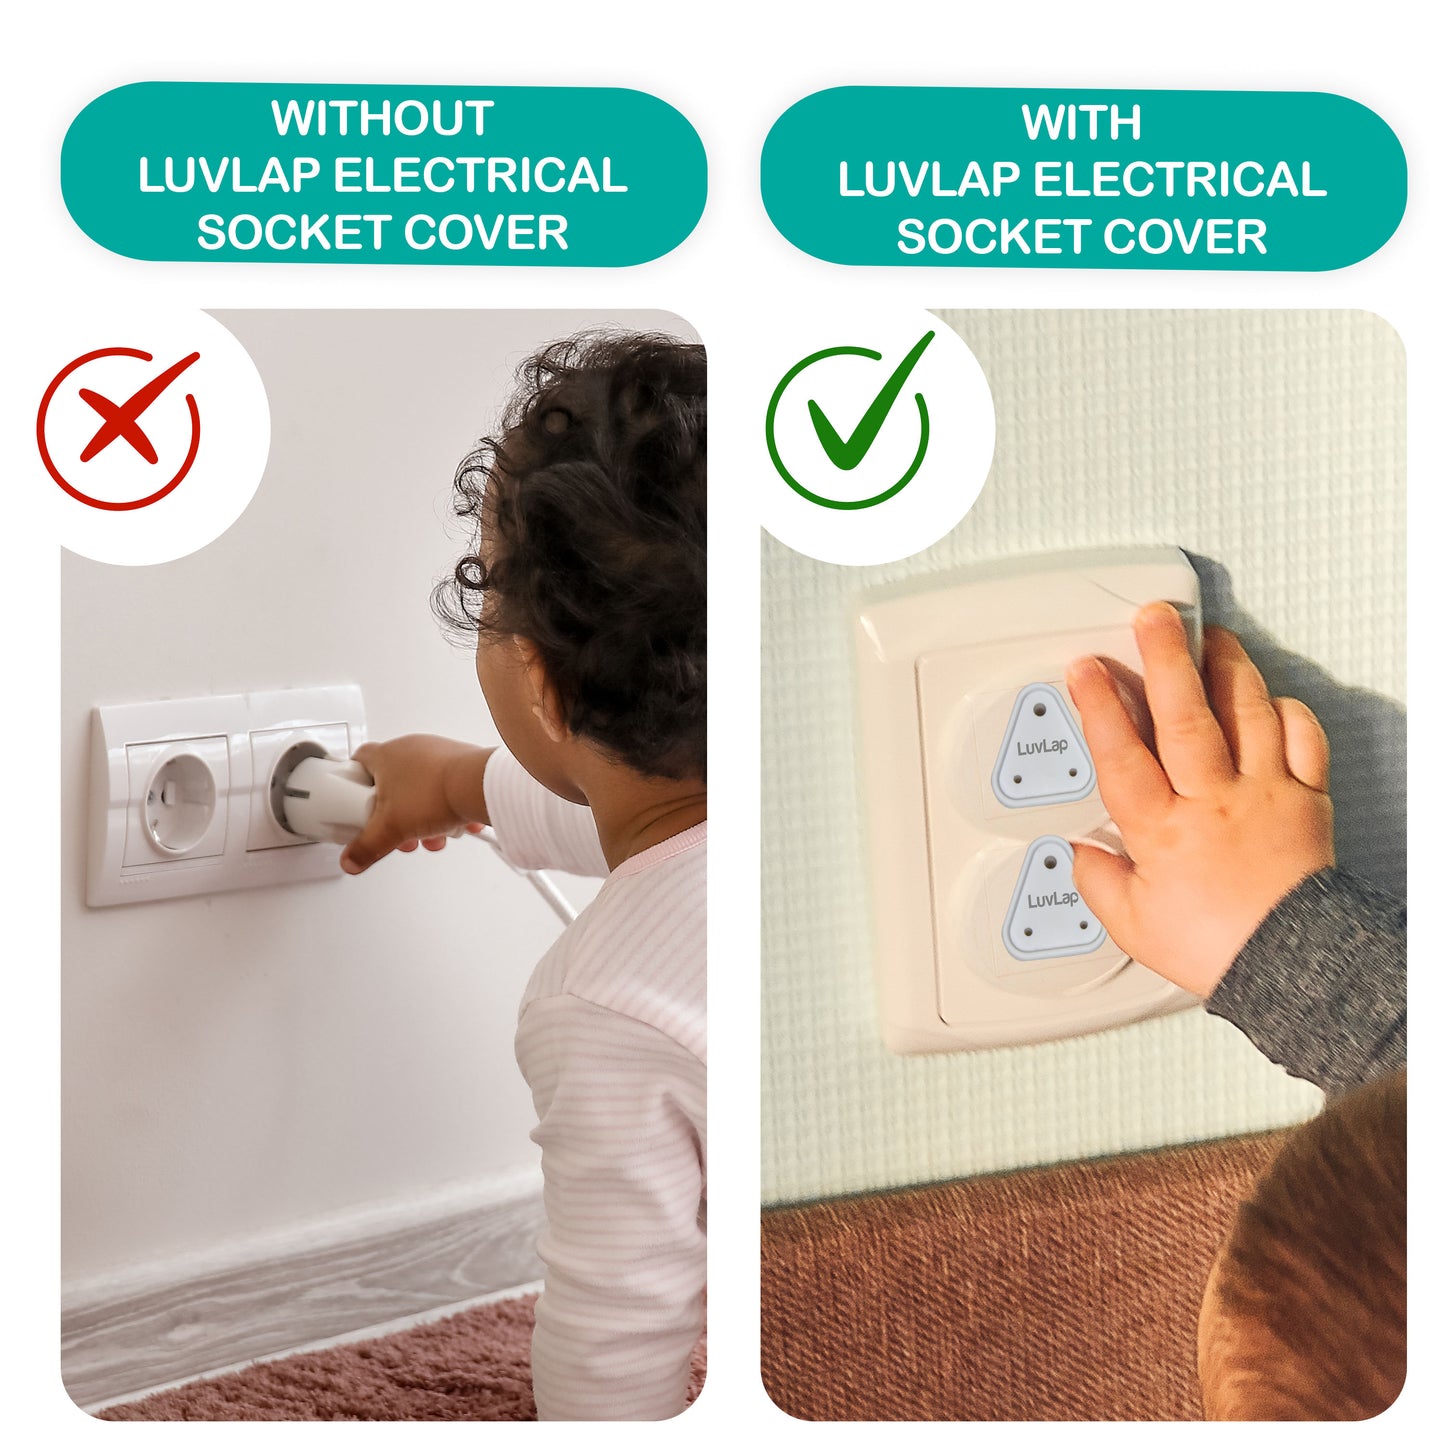 Baby Safety Combo Pack - 2 Metre Edge Protector 4 Door Stoppers 6 Corner Guards 4 Cabinet Locks 4 Safety Locks 10 Socket Covers